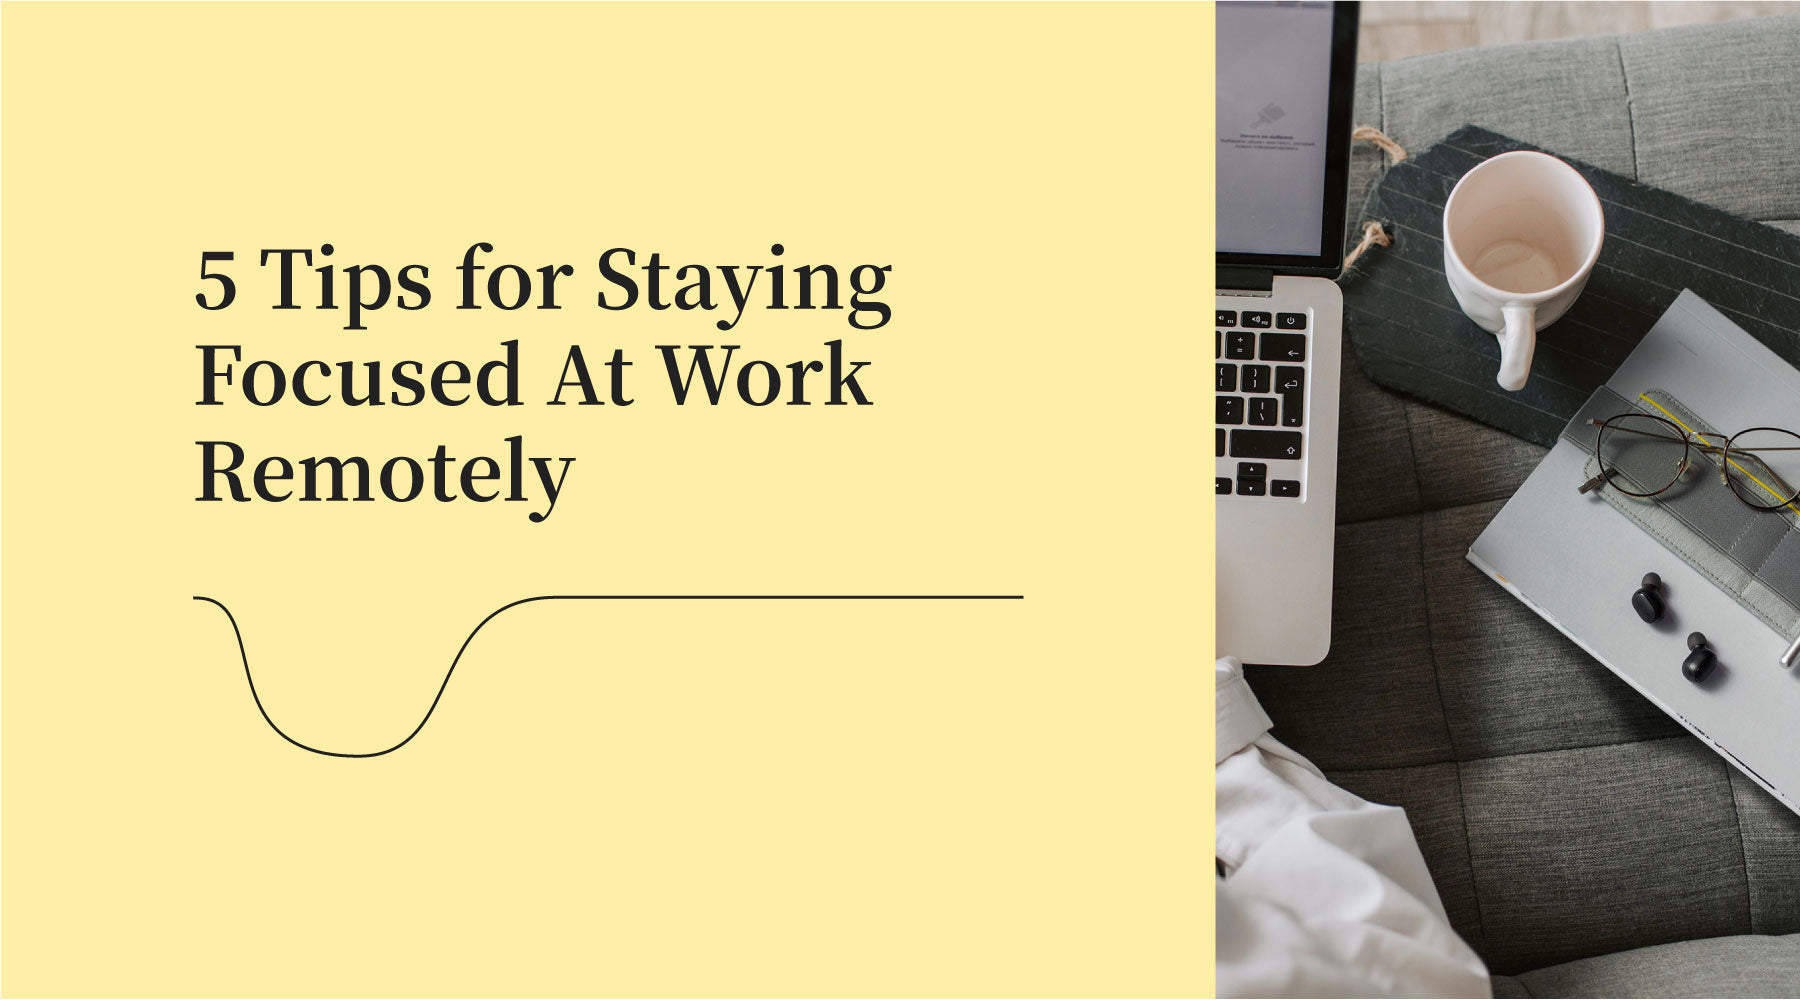 5 Tips for Staying Focused At Work Remotely